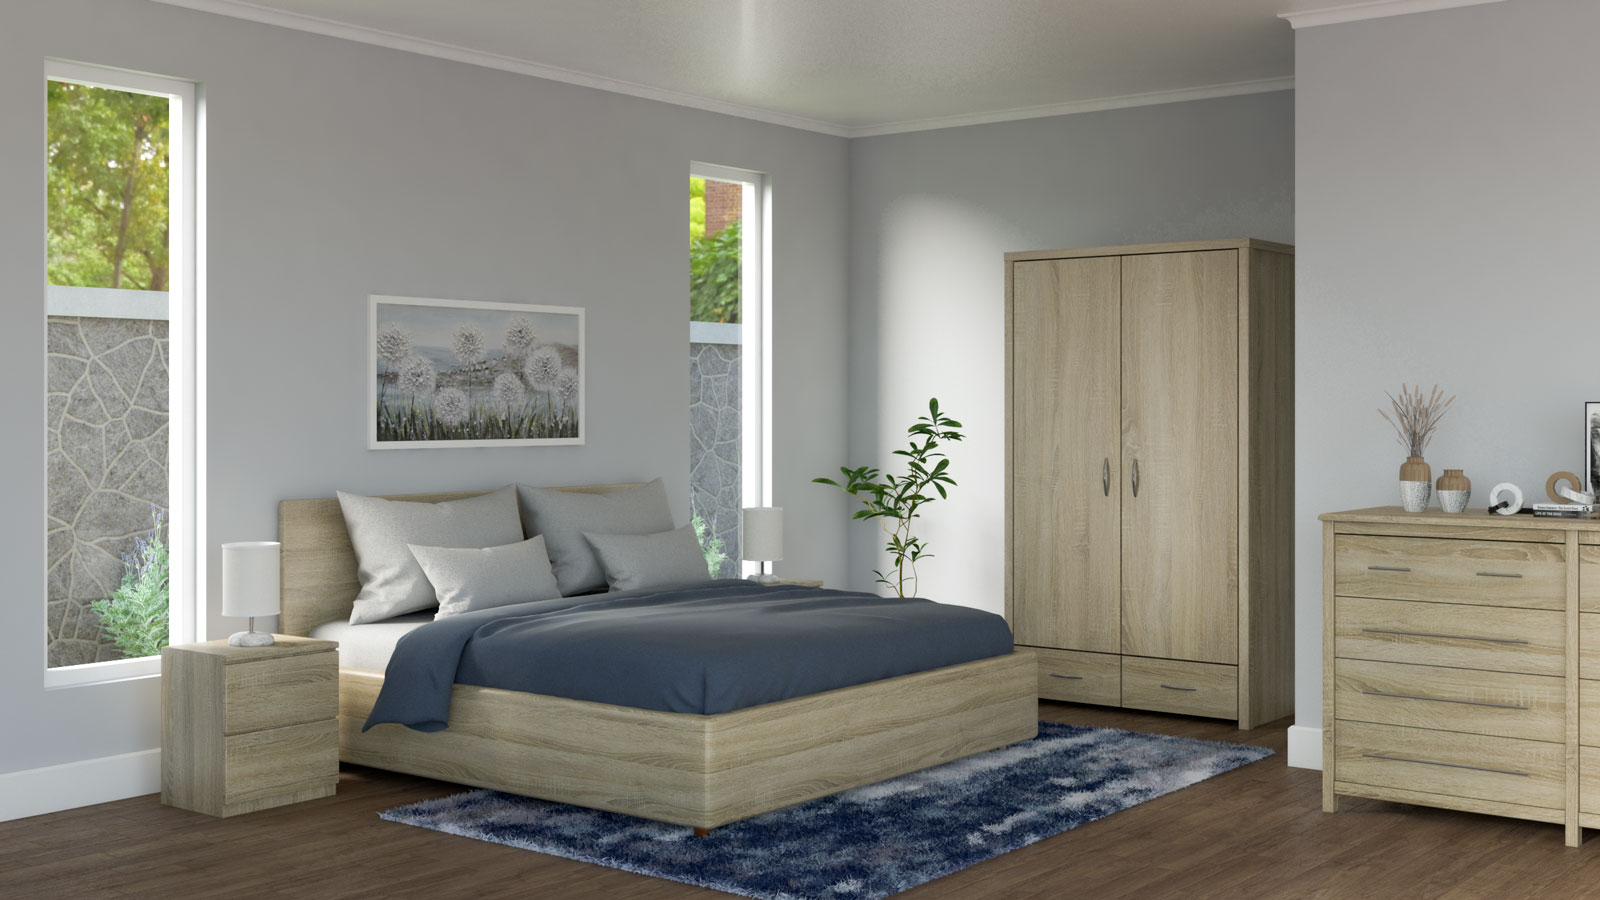 What Color Bedding Goes With Wood Furniture